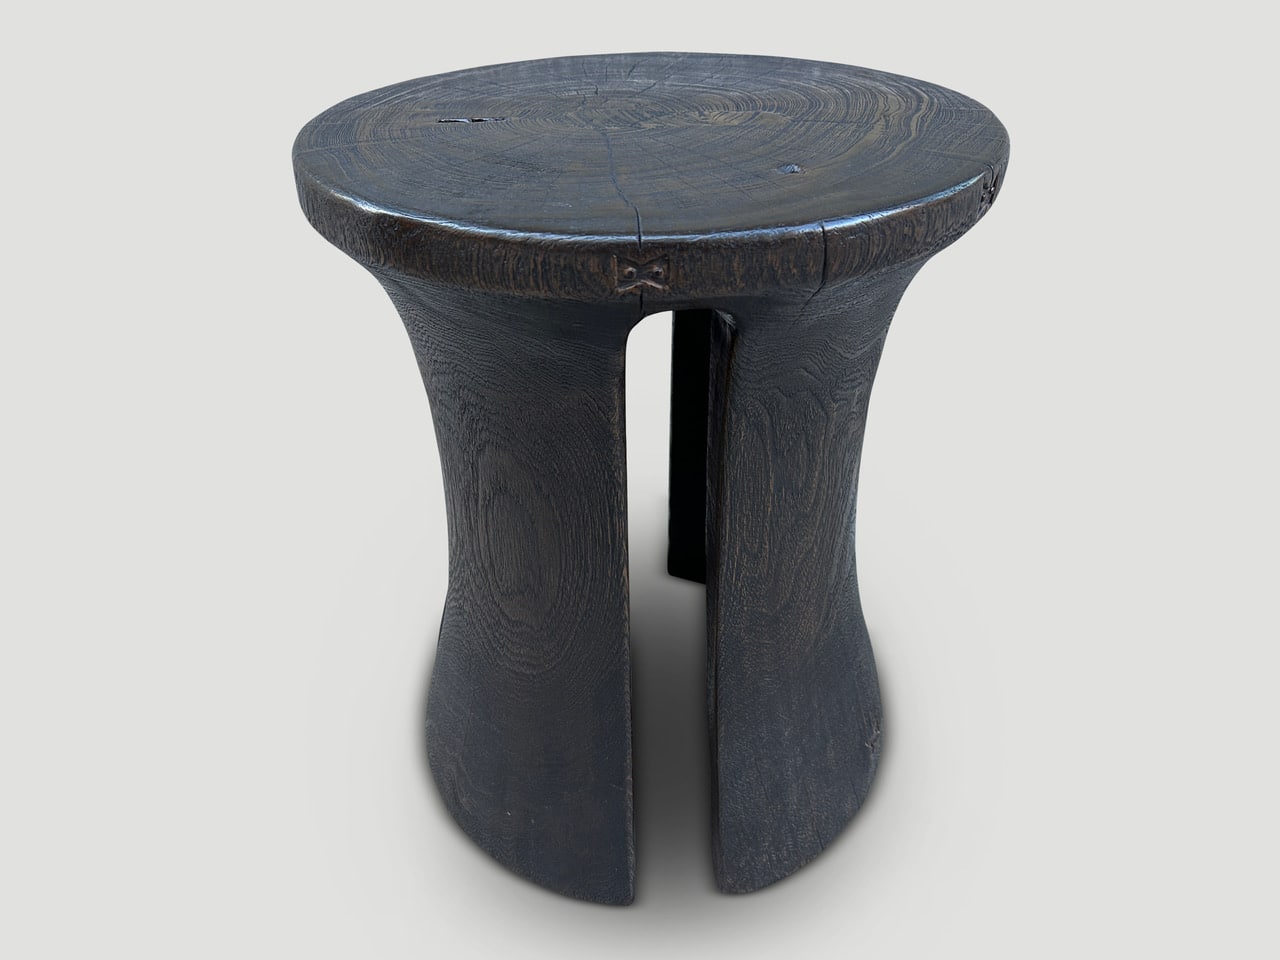 sculptural side table or stool